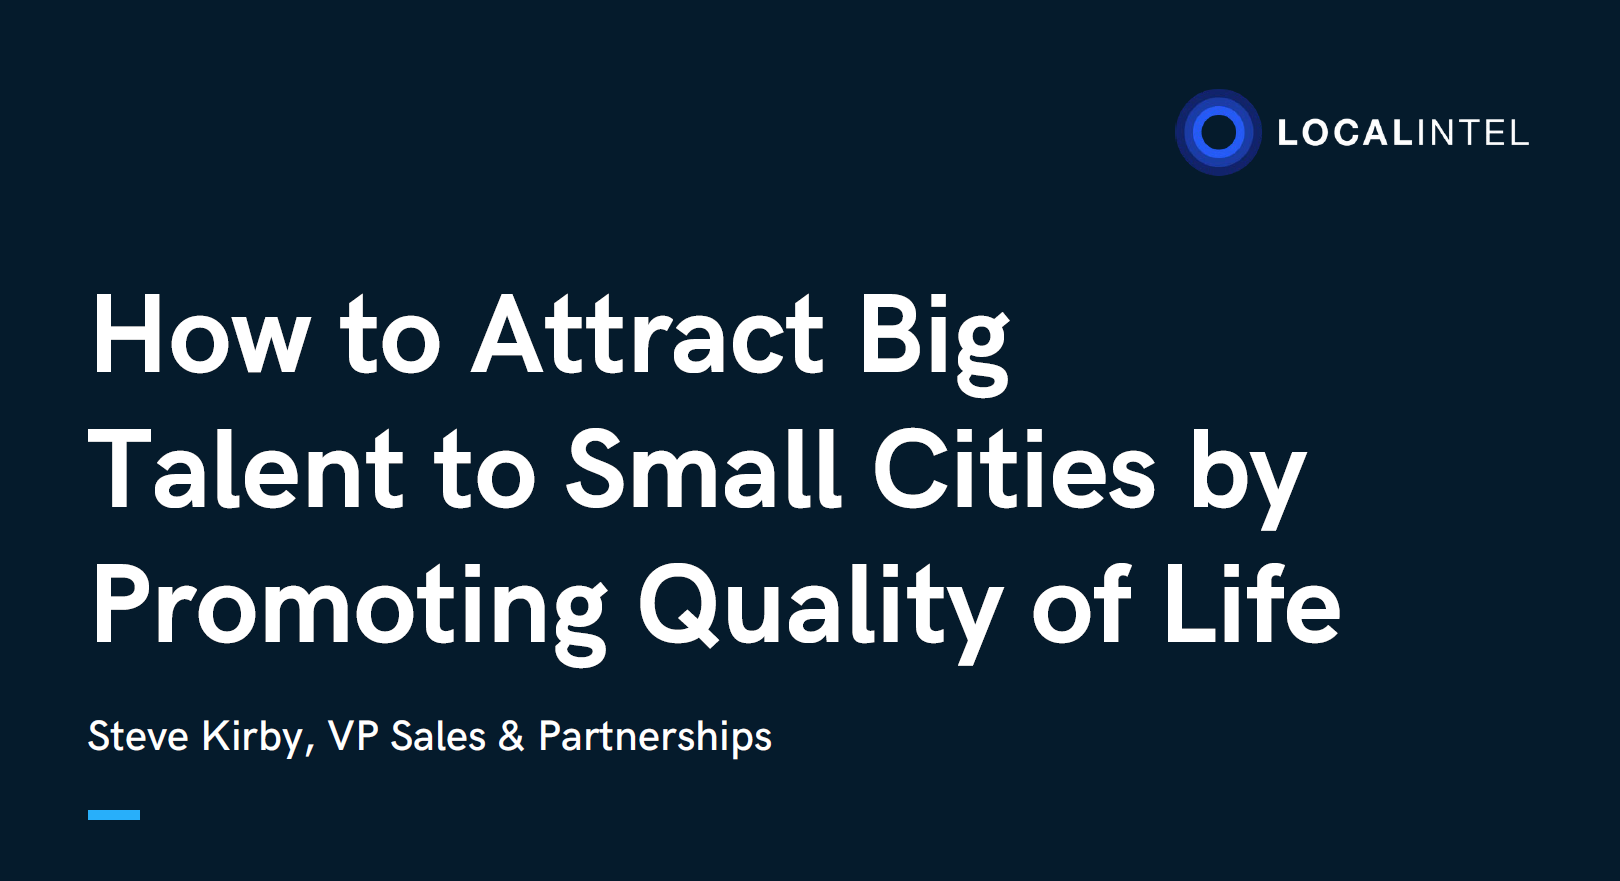 LOCAL INTEL: How to Attract Big Talent to Small Communities by Promoting Quality of Life